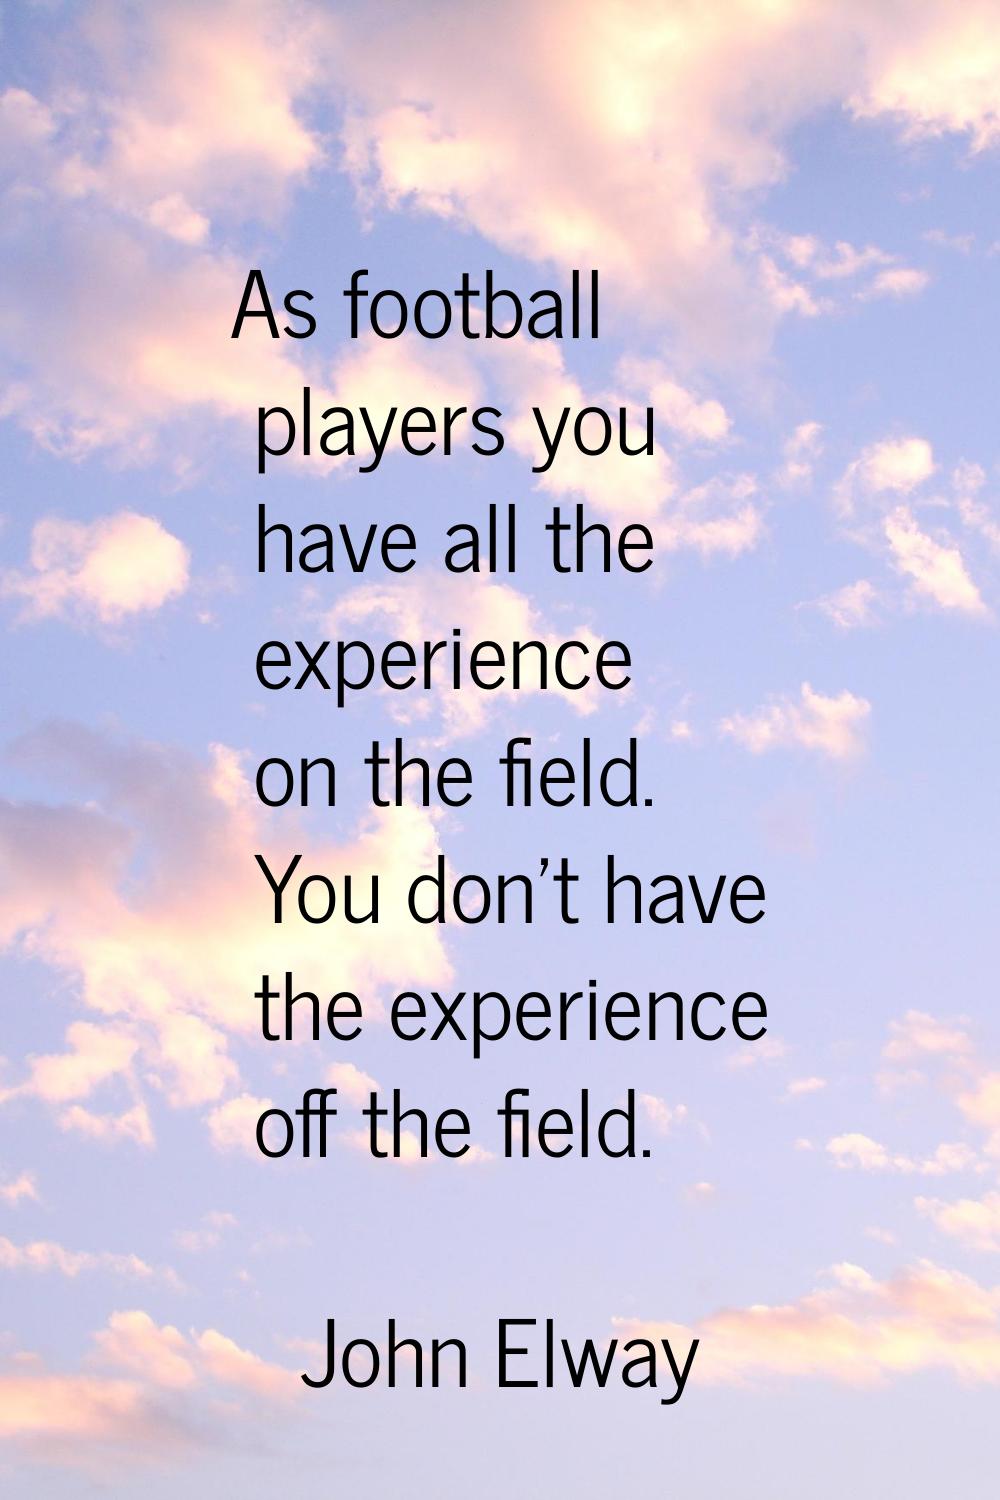 As football players you have all the experience on the field. You don't have the experience off the